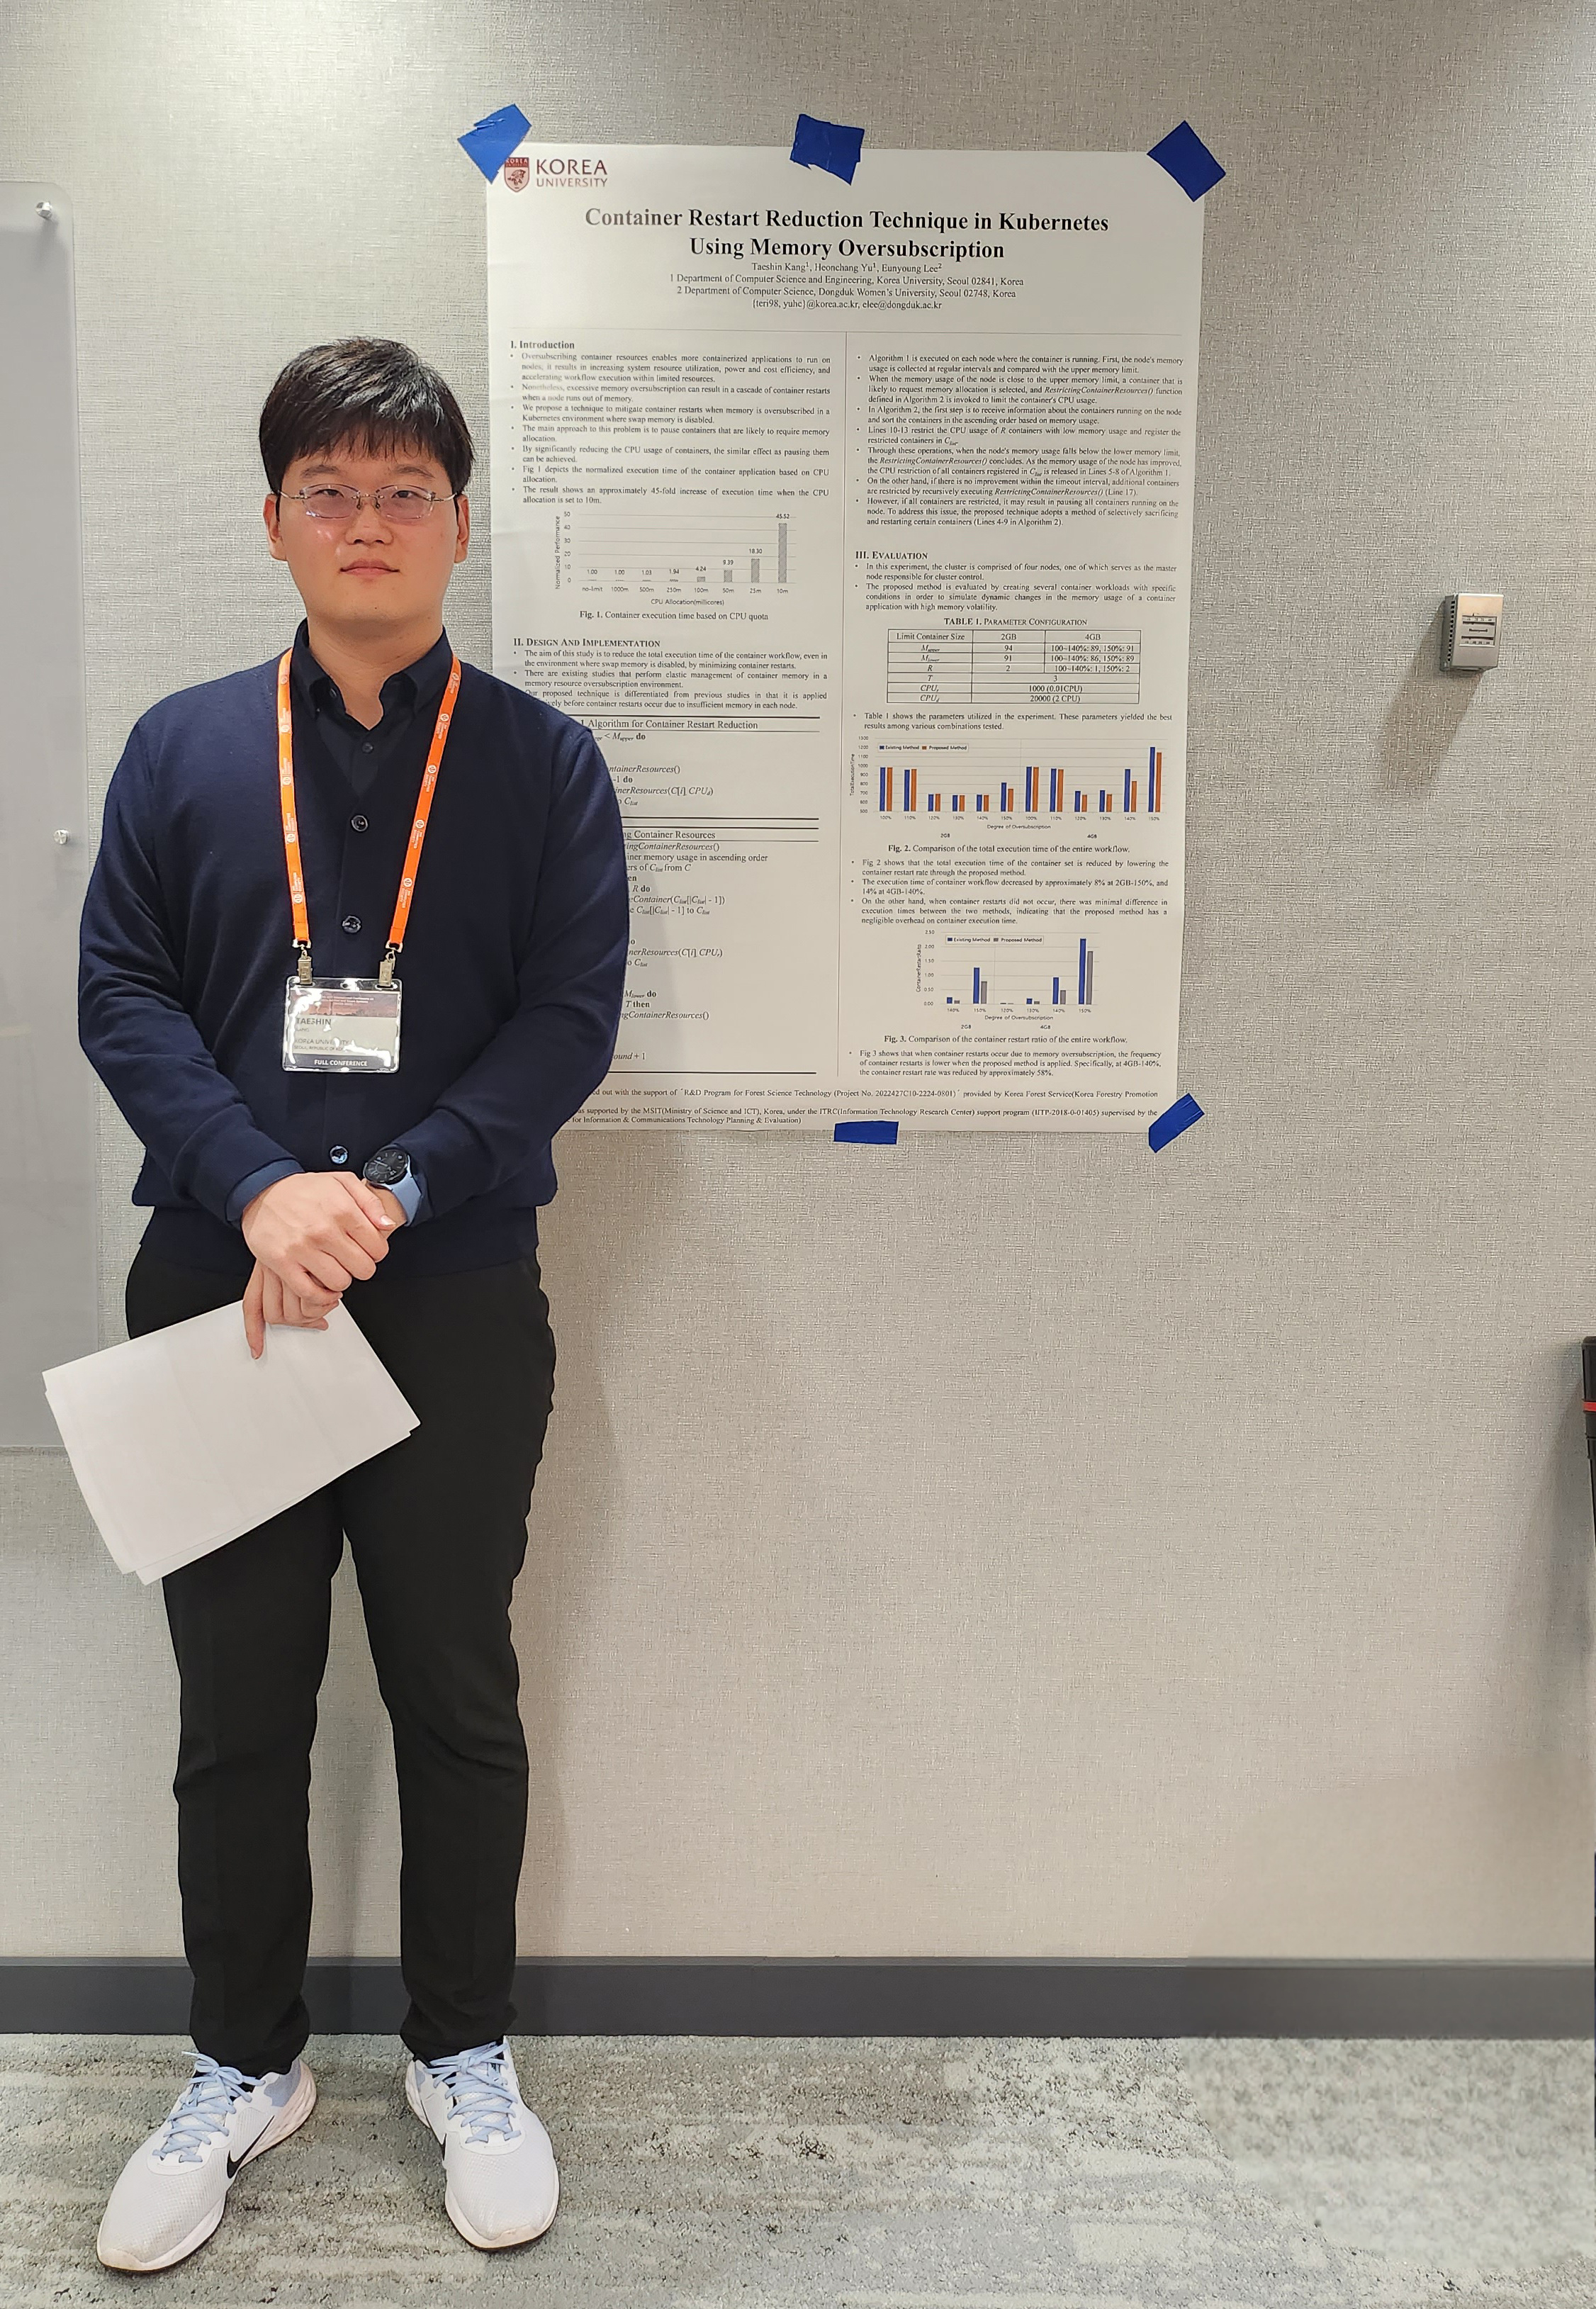 Taeshin Kang (M.S. student) is presenting his paper.